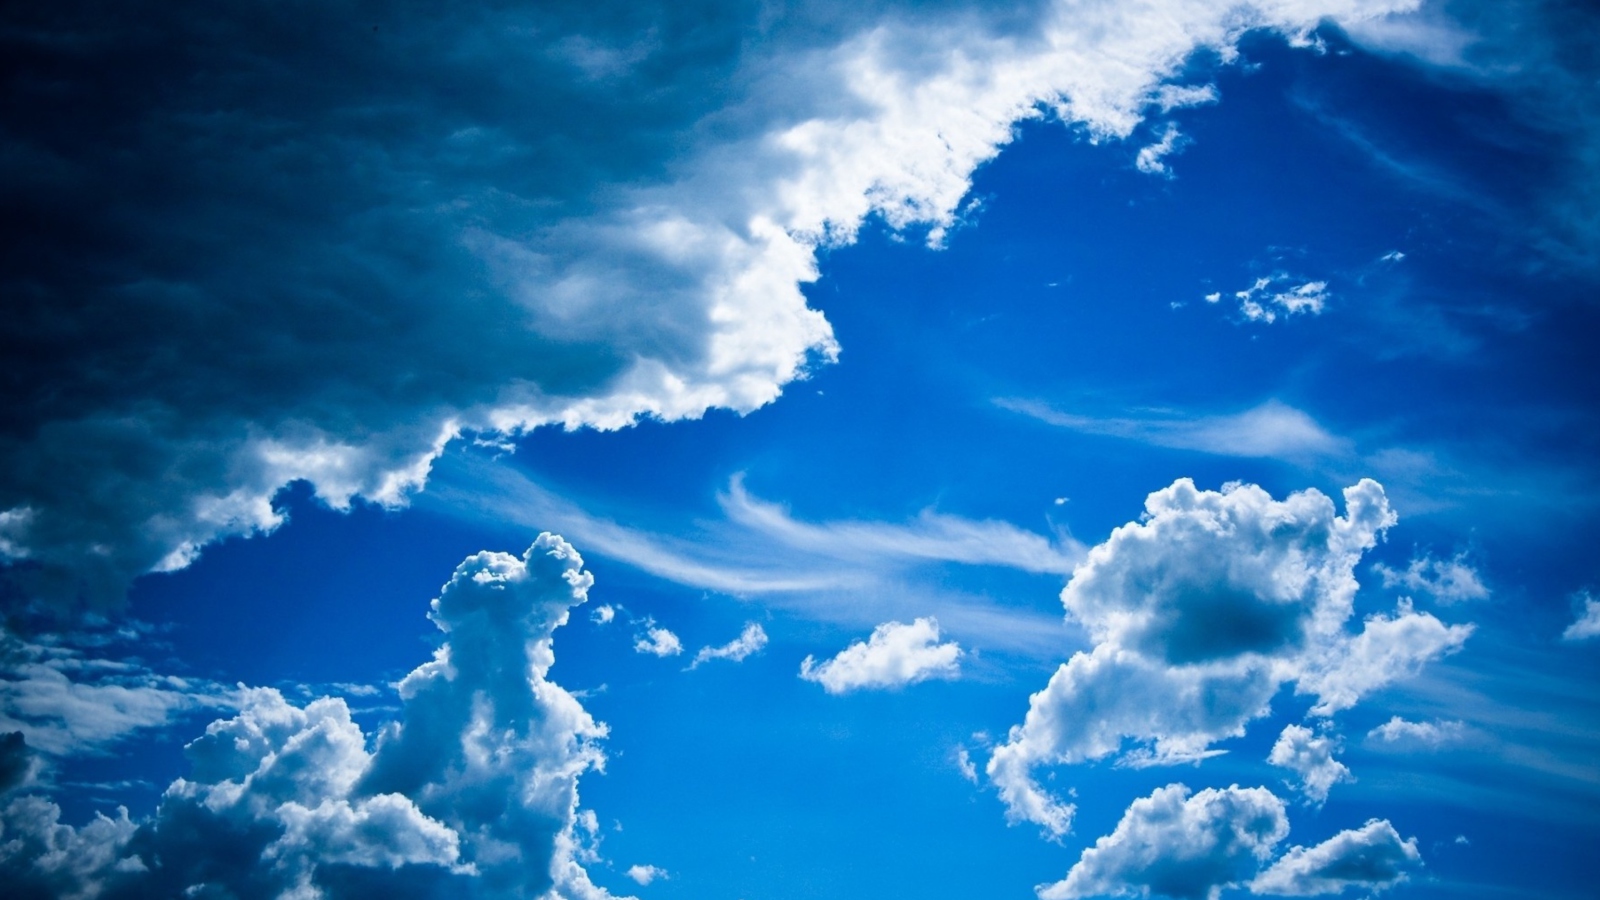 Blue Sky And Clouds wallpaper 1600x900